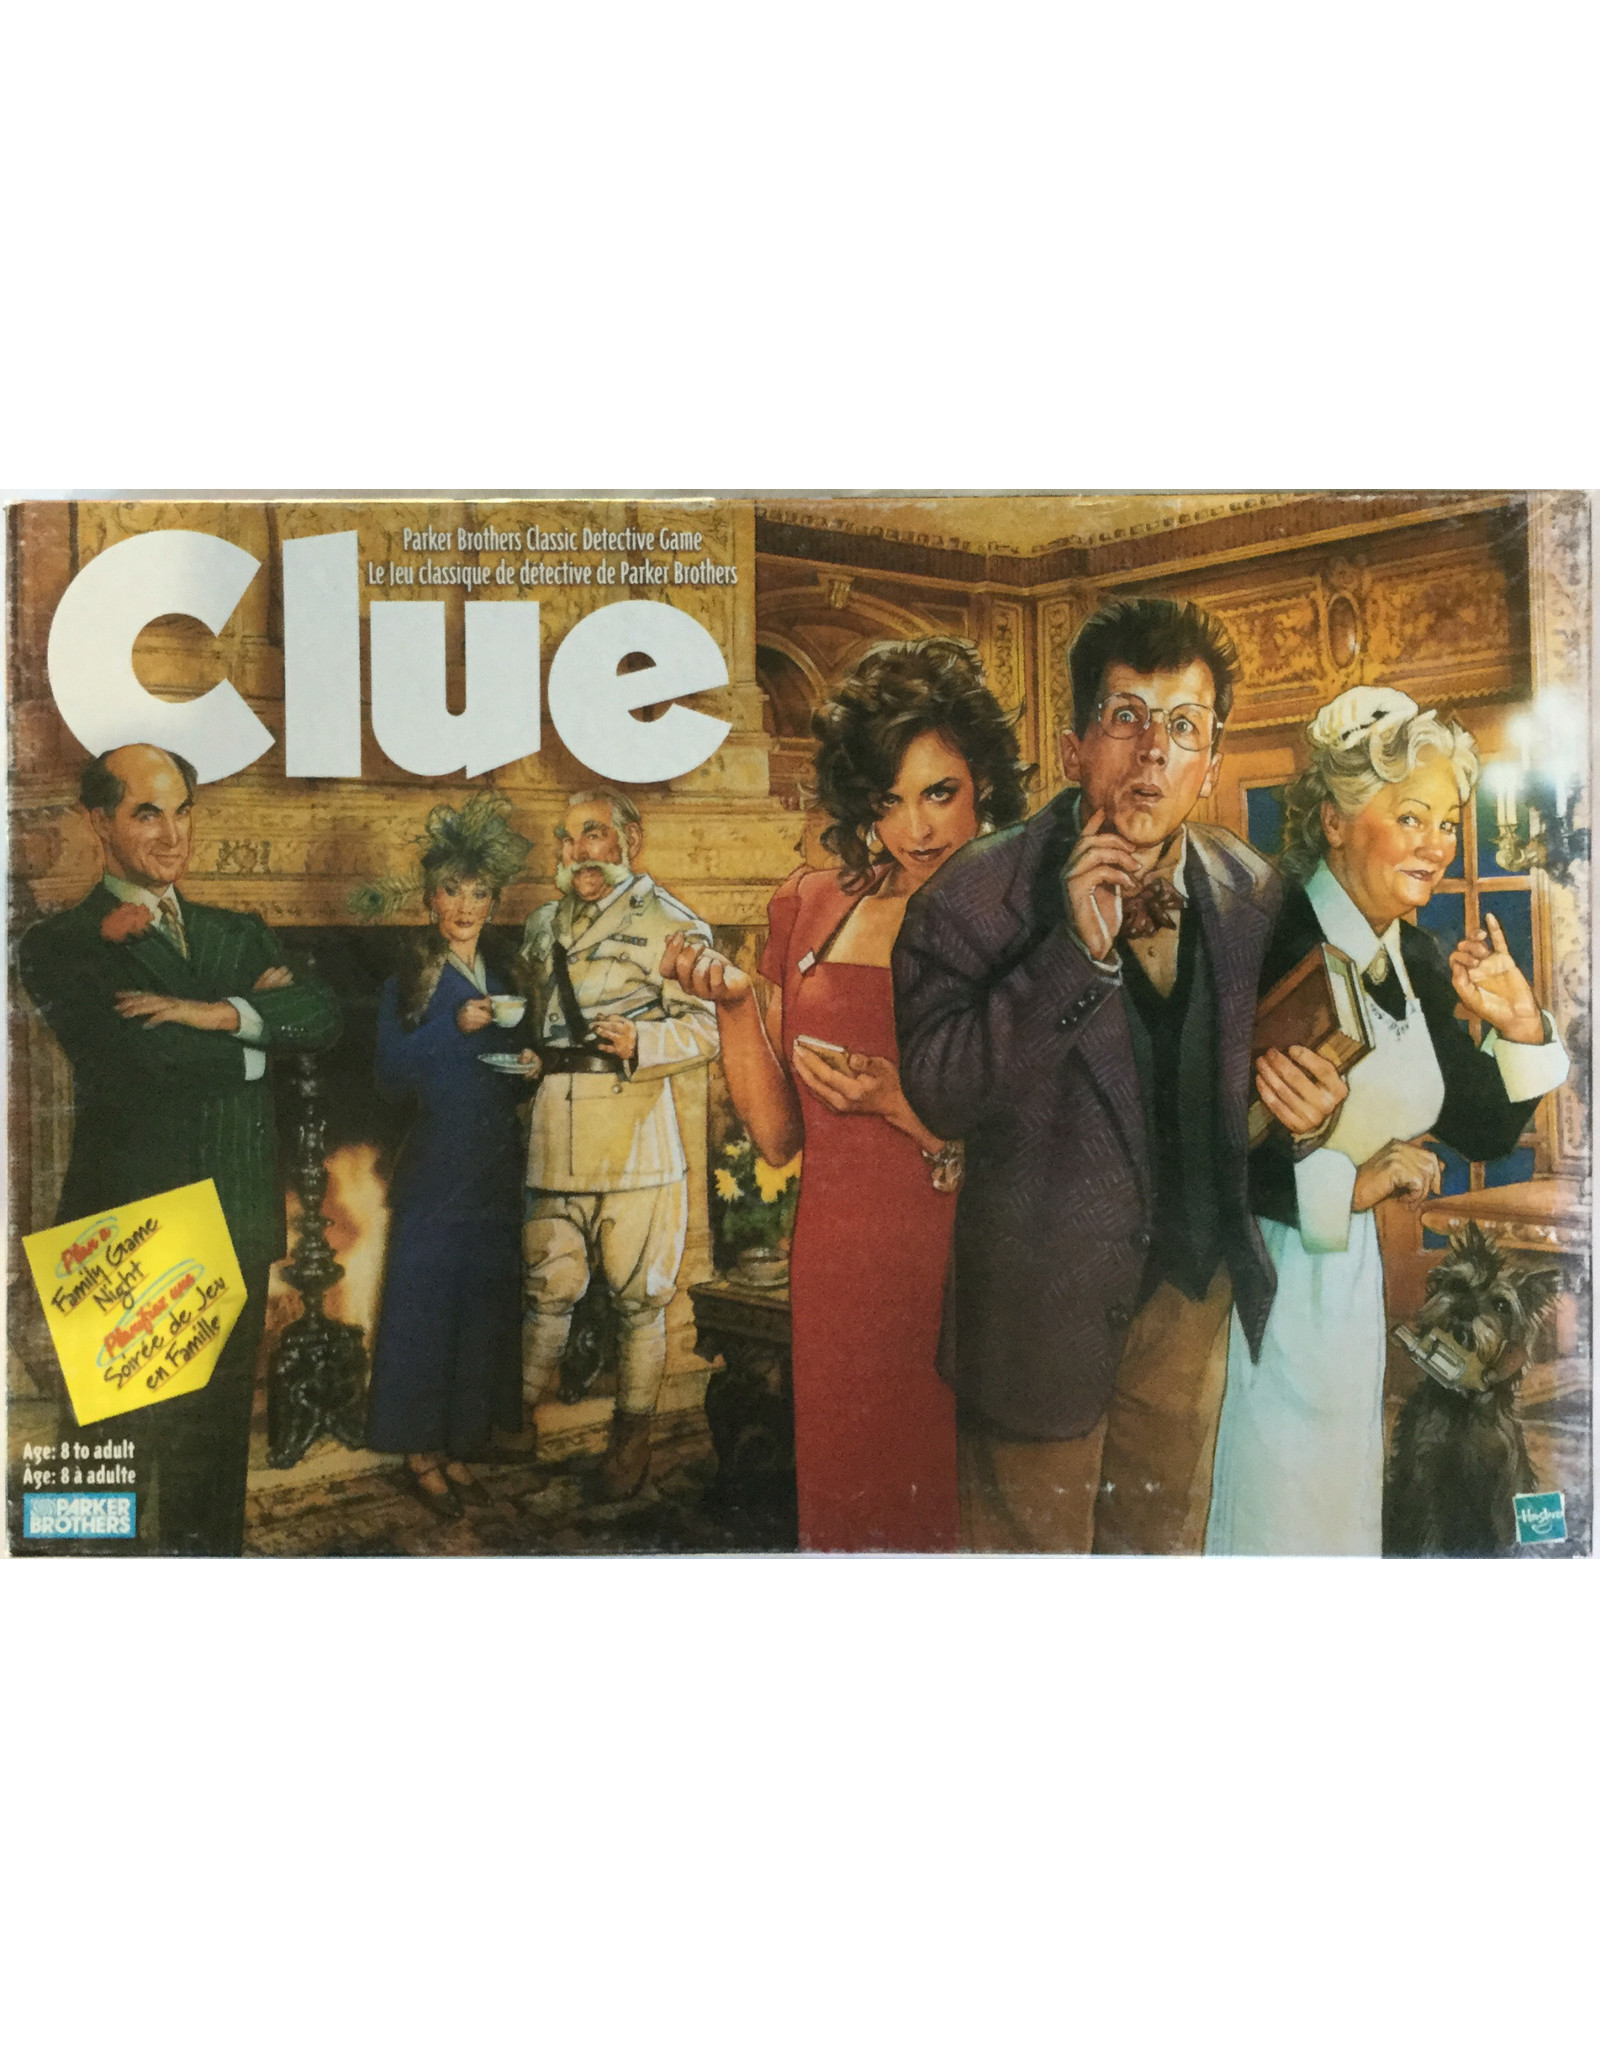 PARKER BROTHERS Clue (1996)